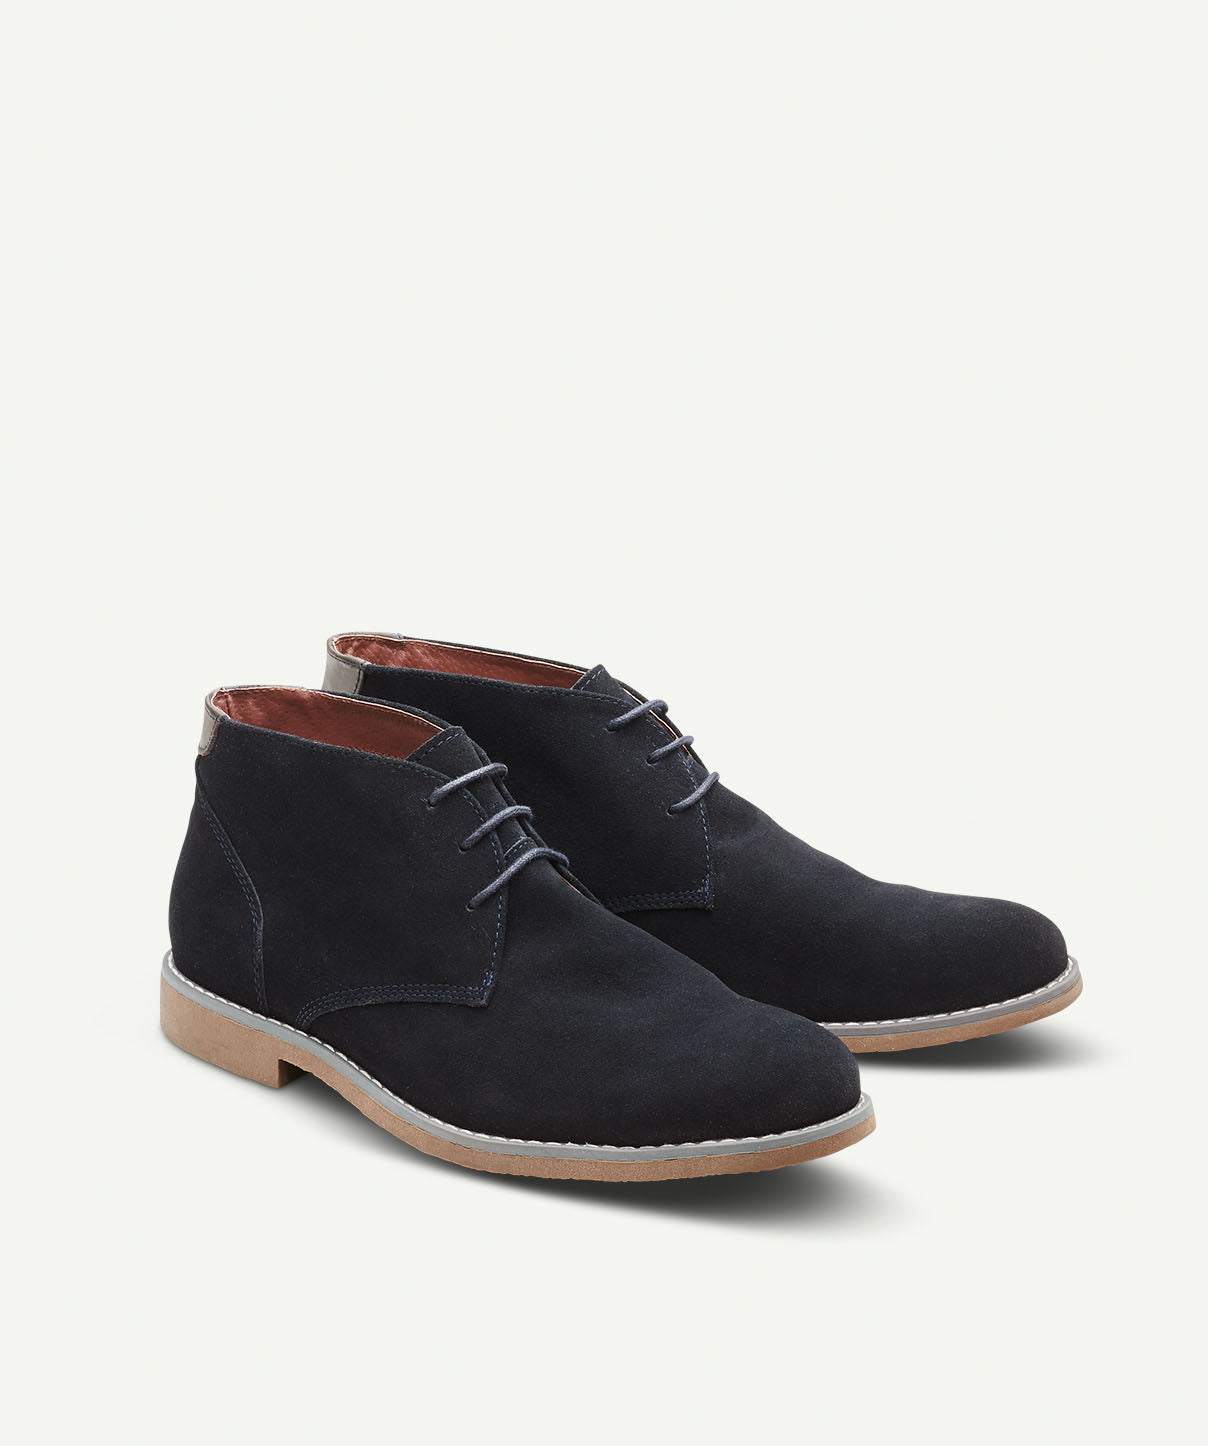 navy suede dress shoes